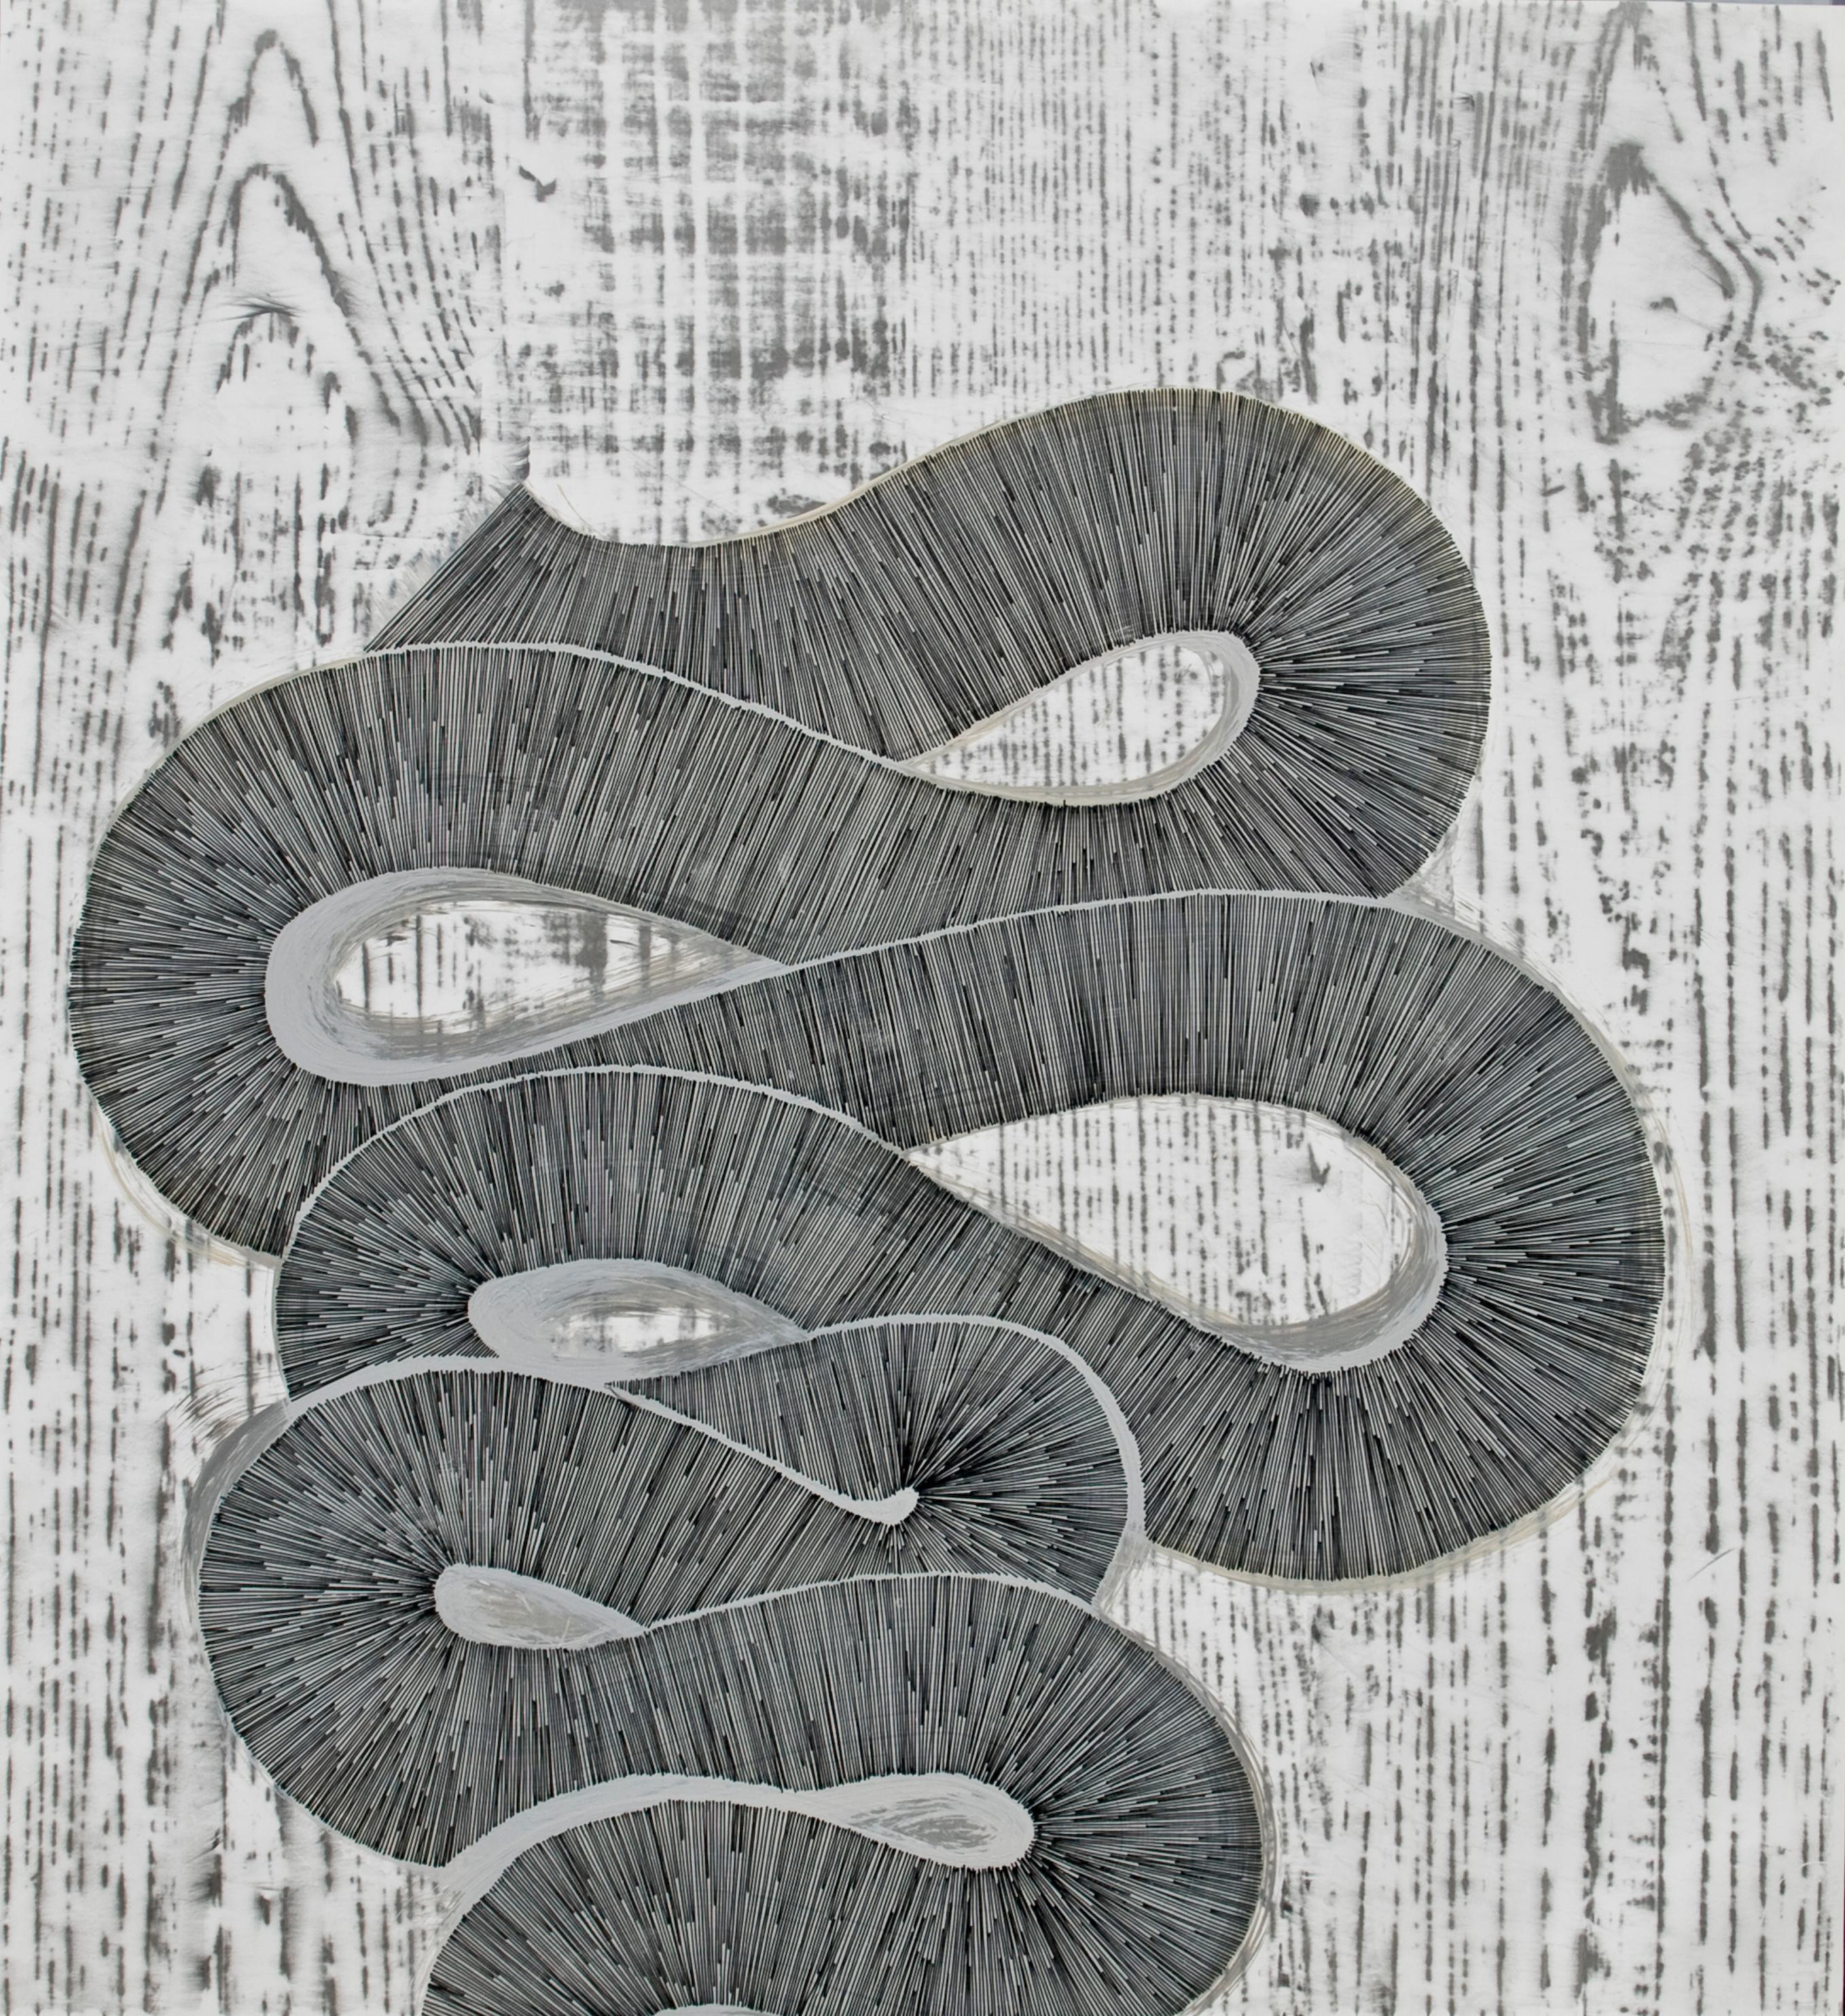 Alyse Rosner Abstract Drawing - With woodgrain (ravel)